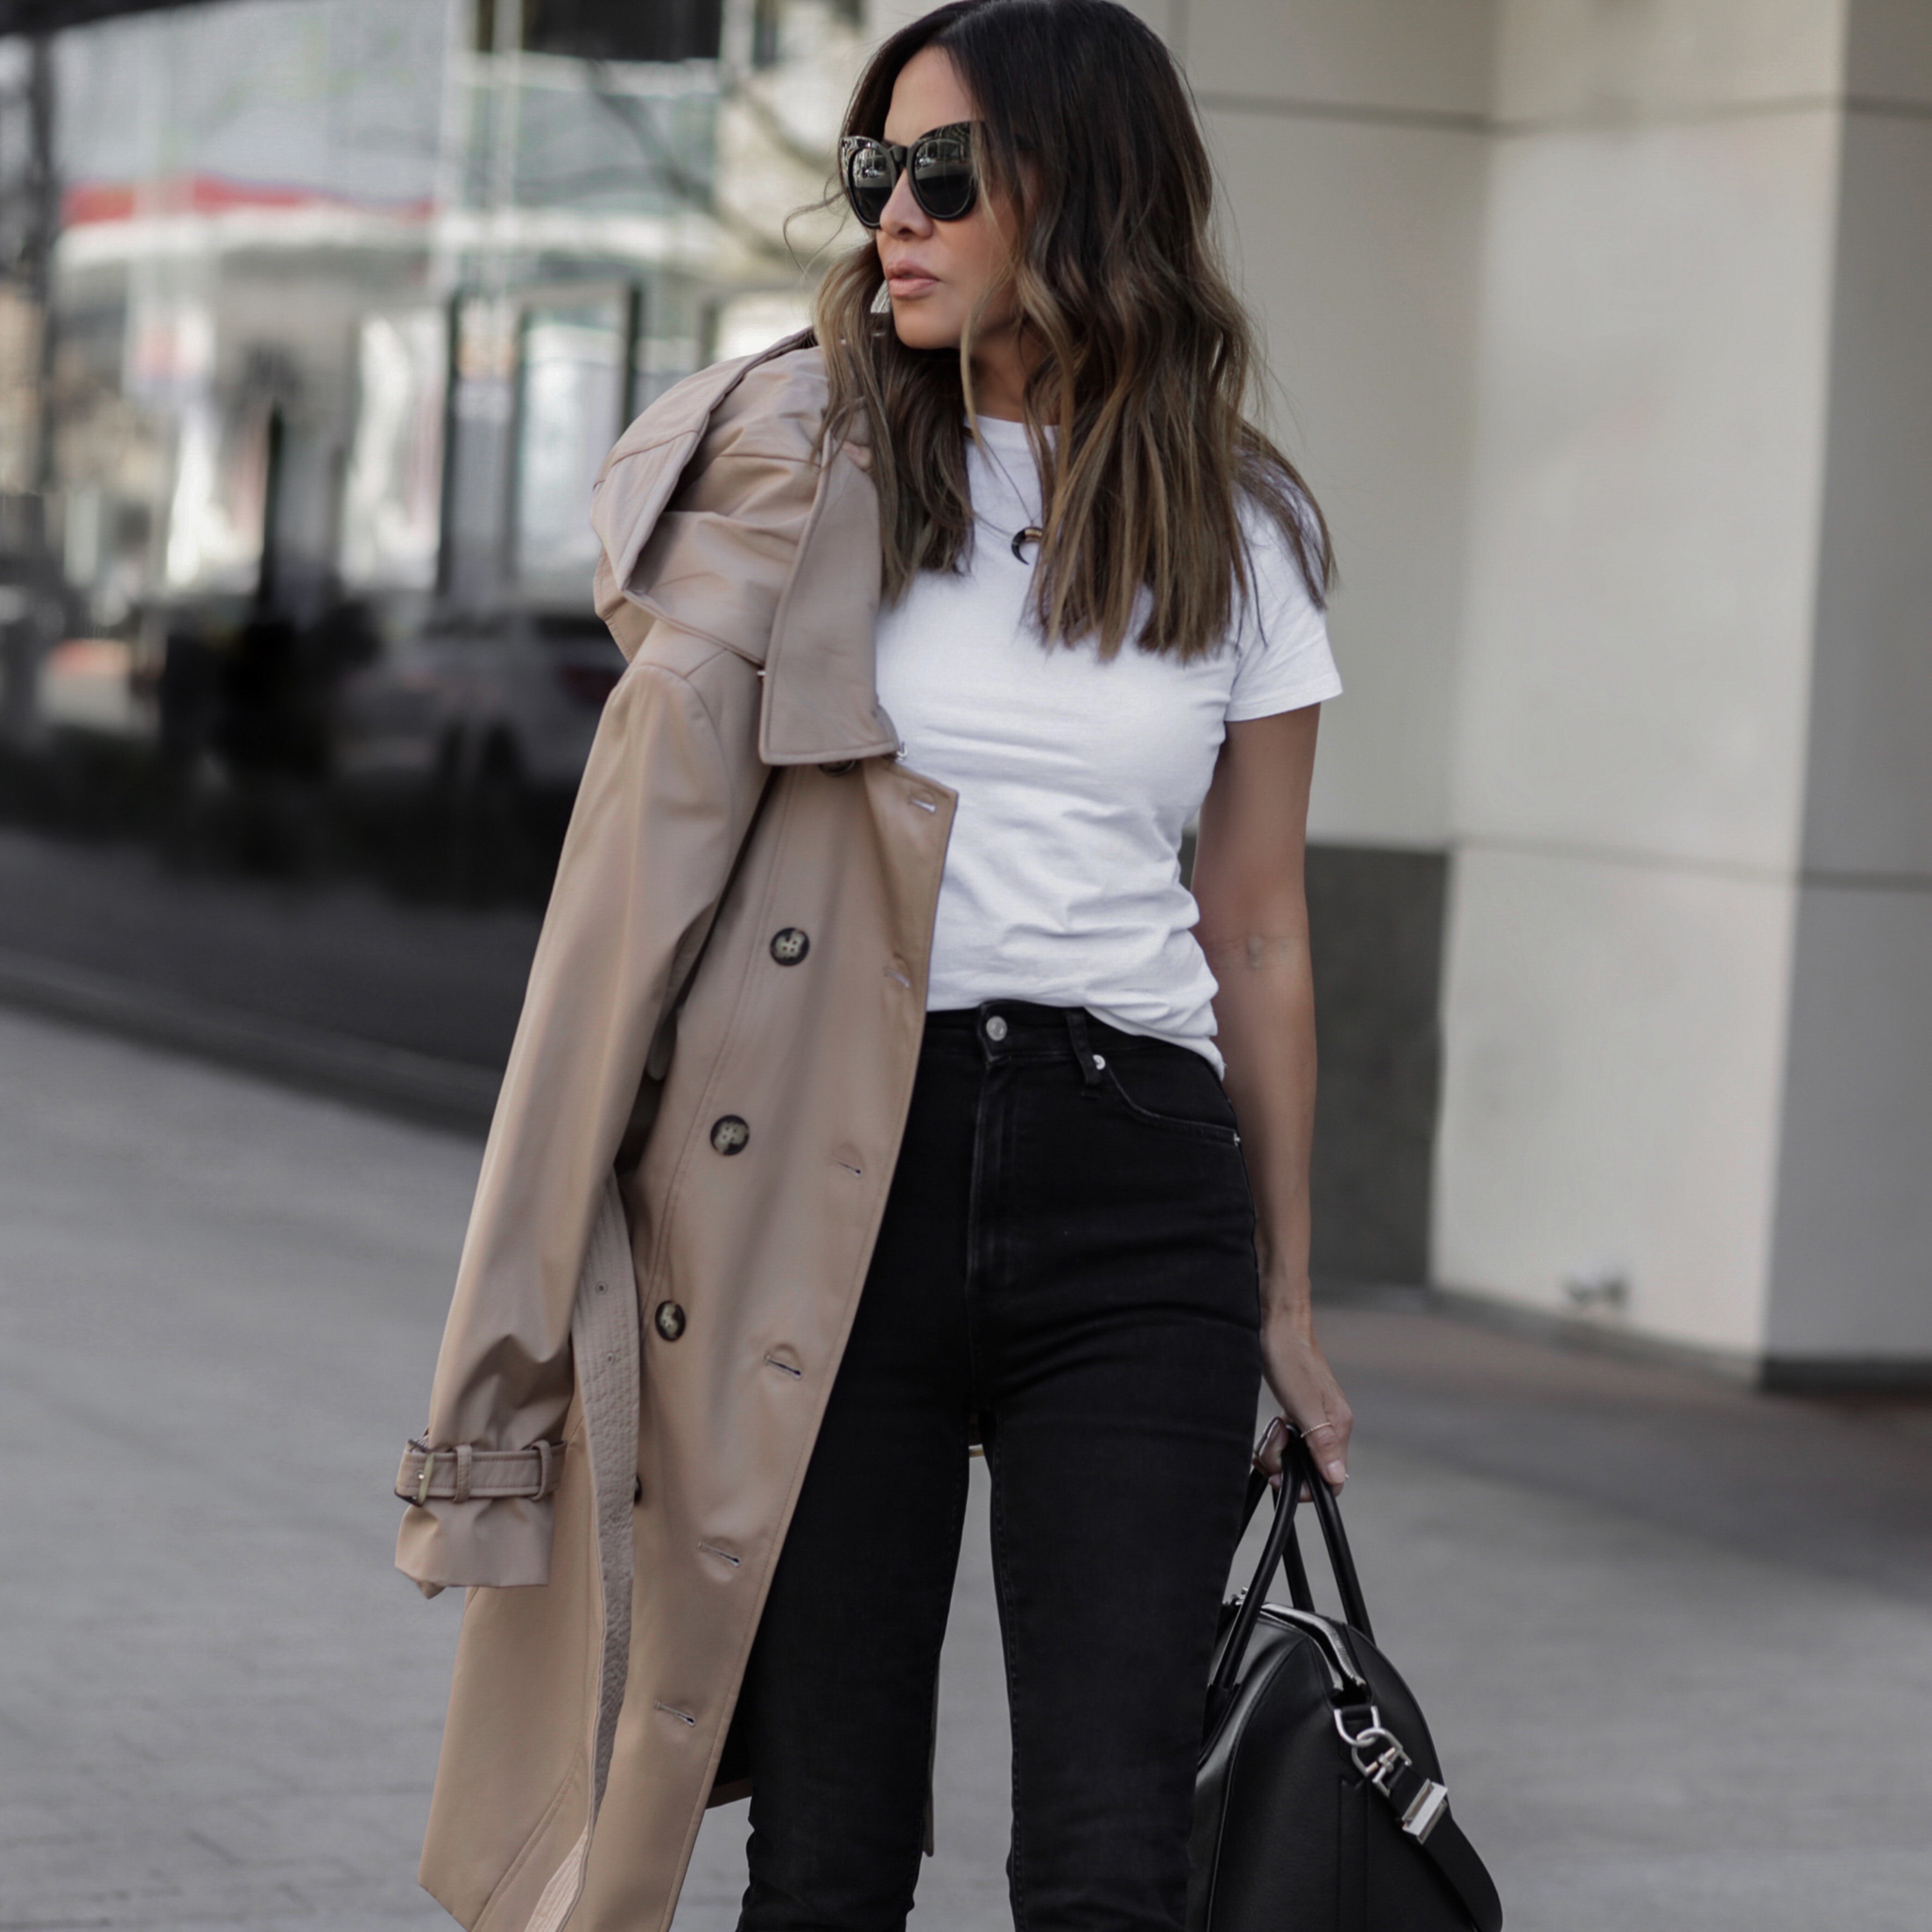 spring fashion trends 2019, spring fashion trends on a budget, lolario style blogger in black jeans and trench coat